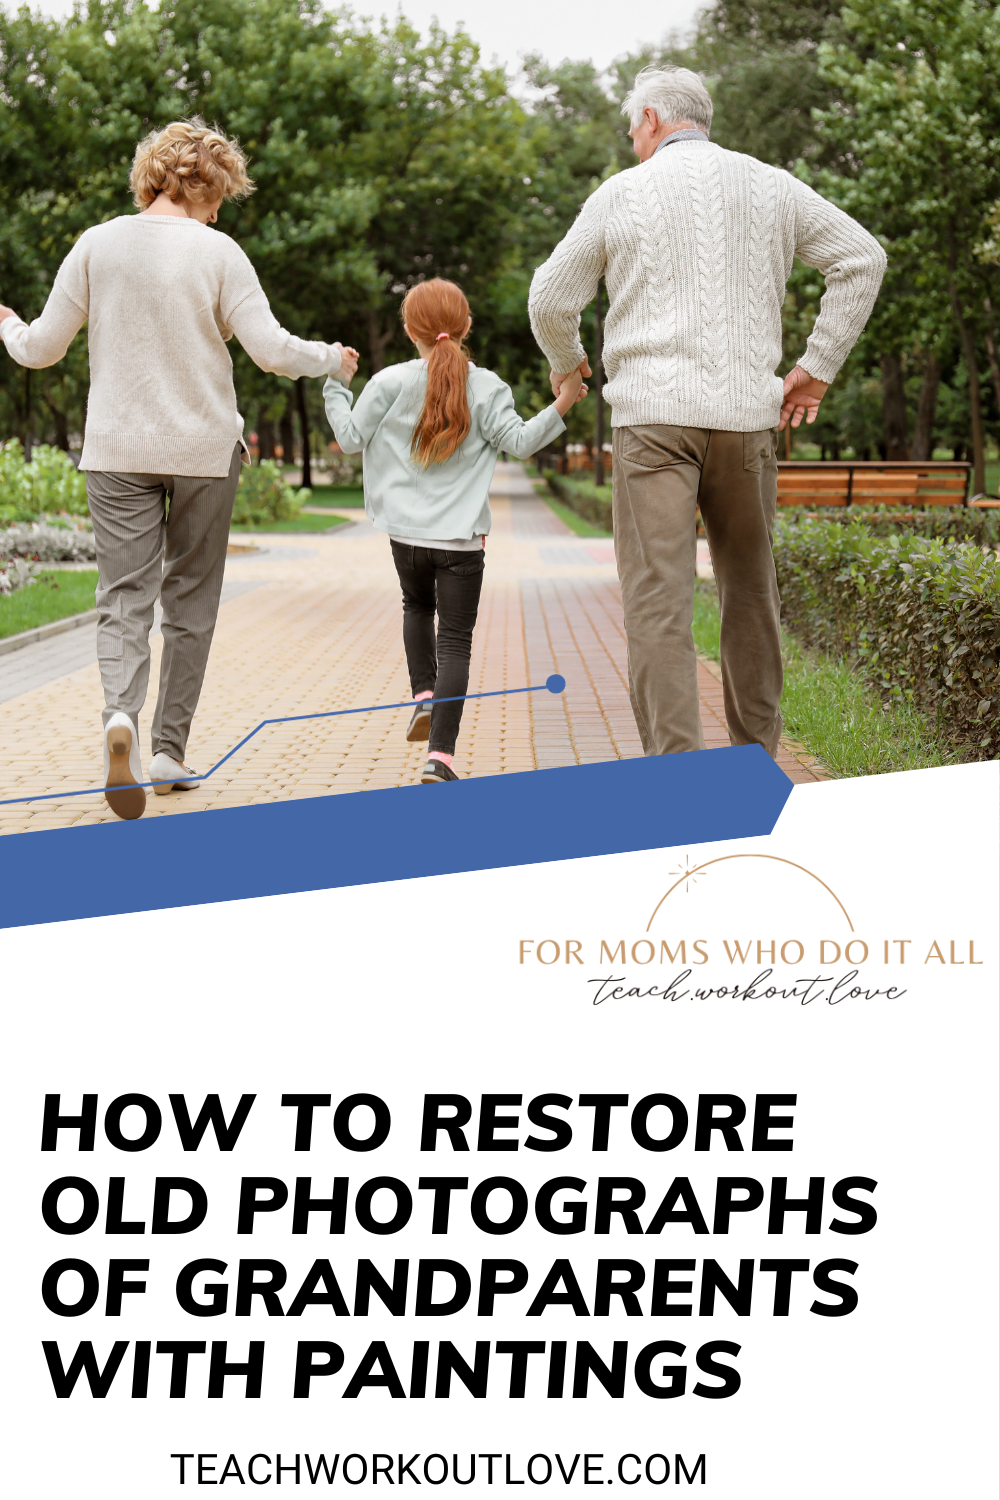 This article will discuss the various artistic approaches to restoring antique photographs and provide helpful tips for getting started.